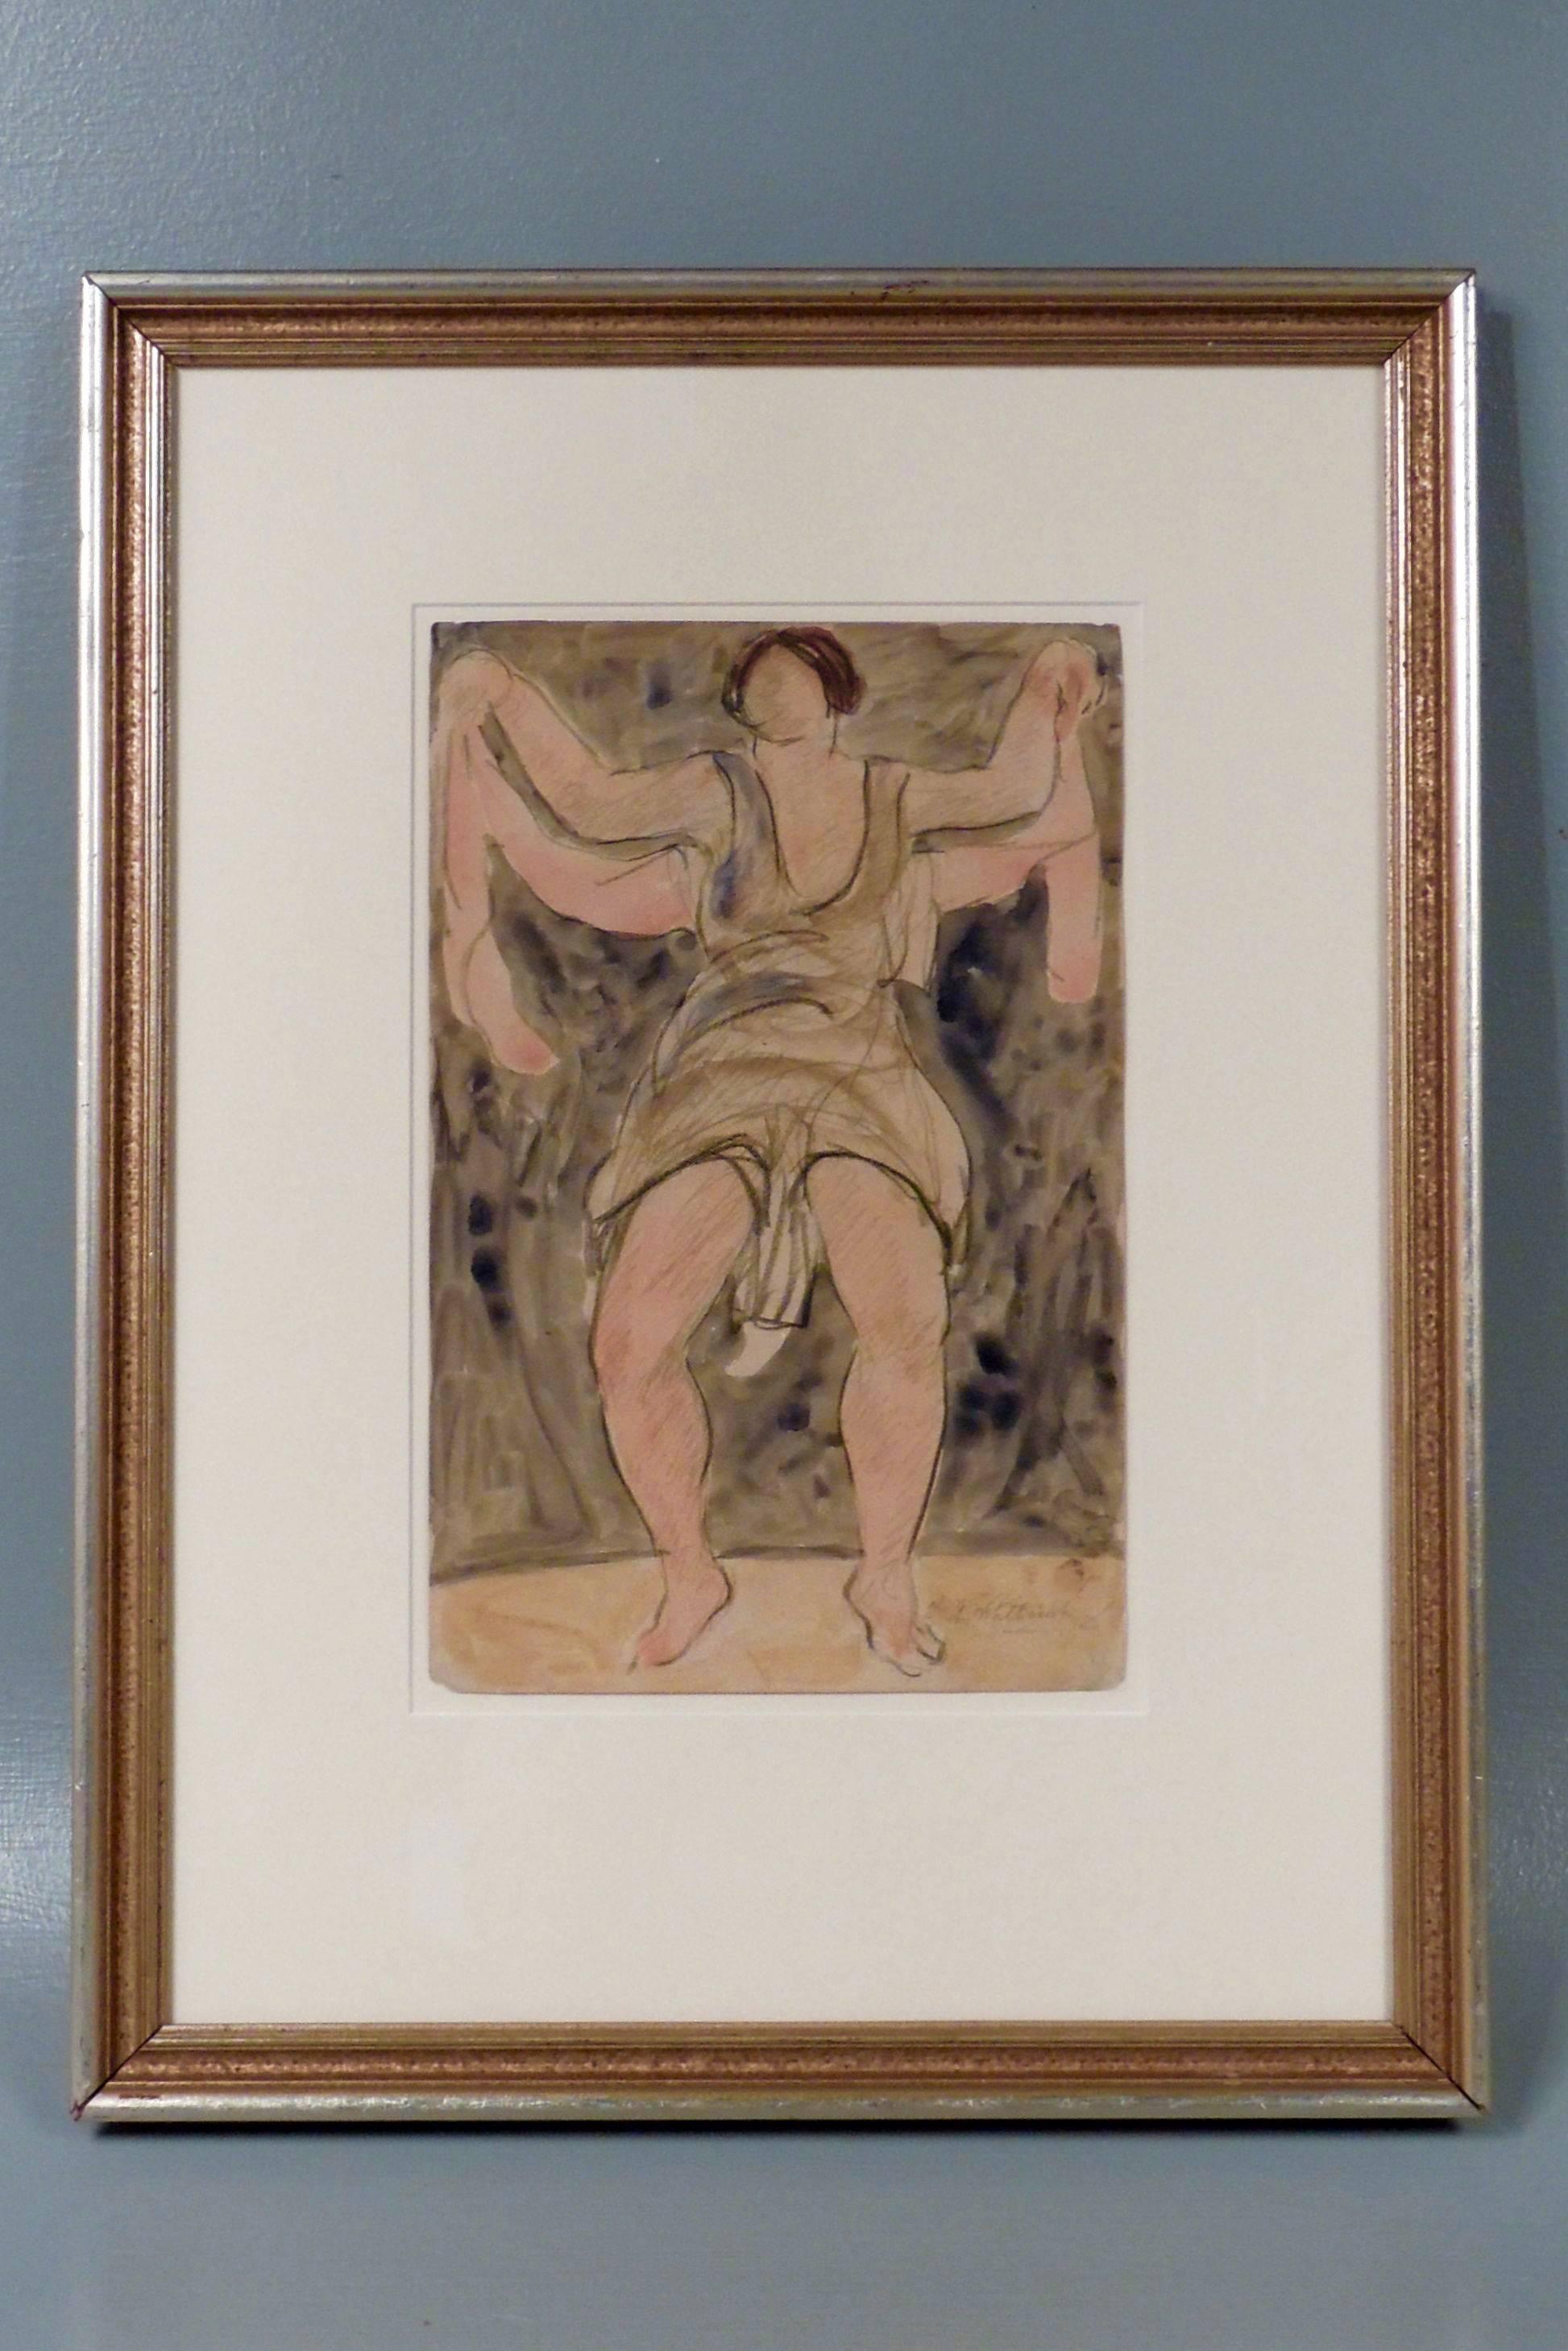 Modernist Watercolored Drawing of Dancer Isadora Duncan, by Abraham Walkowitz 1